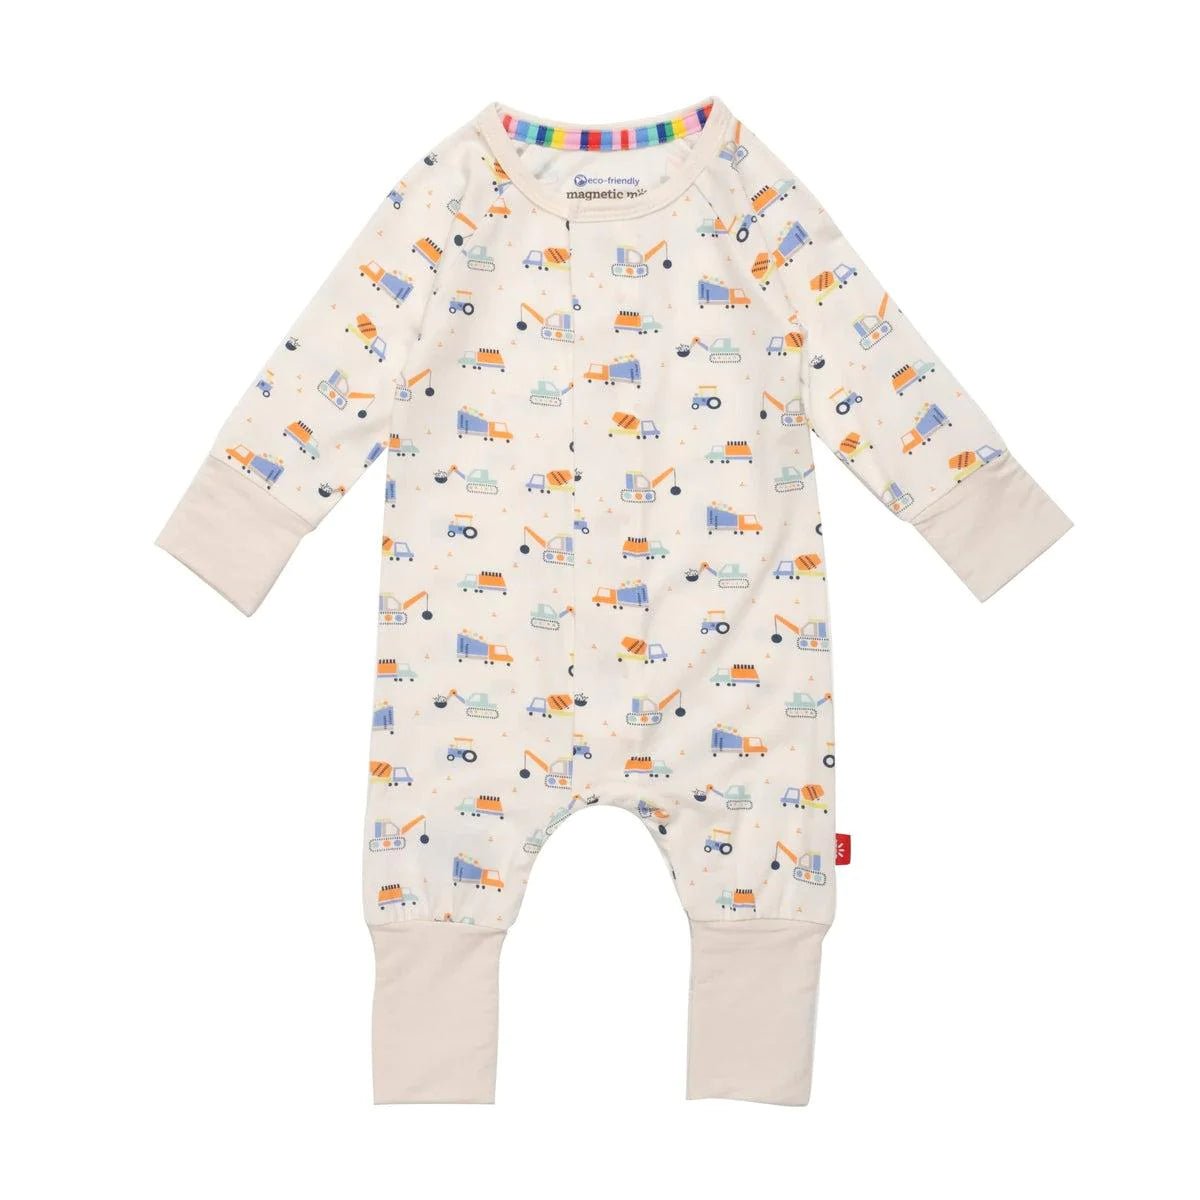 Can You Dig It Coverall Convetible - Lush Lemon - Children's Clothing - Magnetic Me - 840318753751